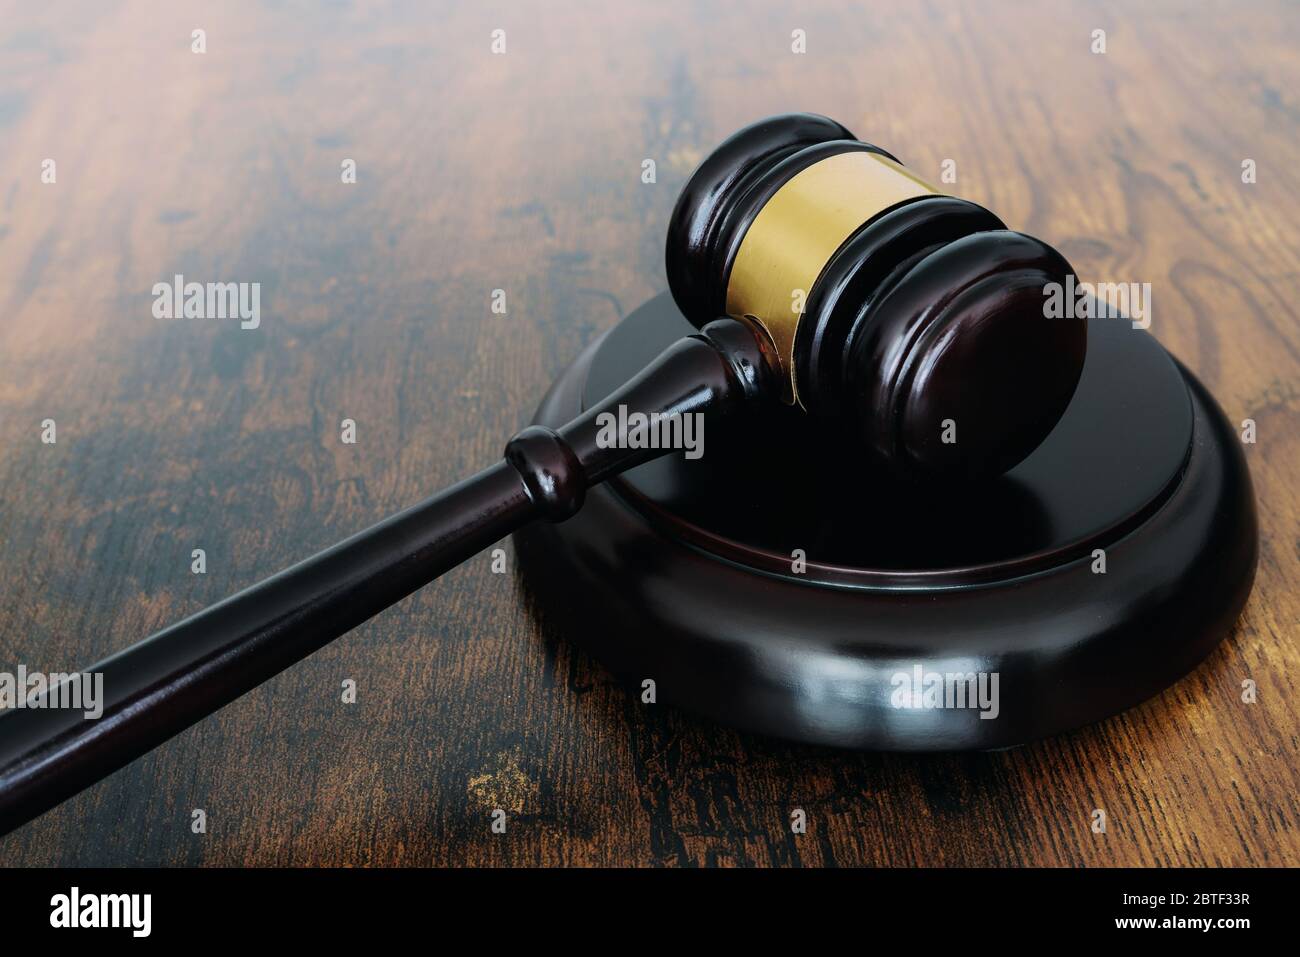 close-up of judges gavel or auction hammer on wooden table Stock Photo